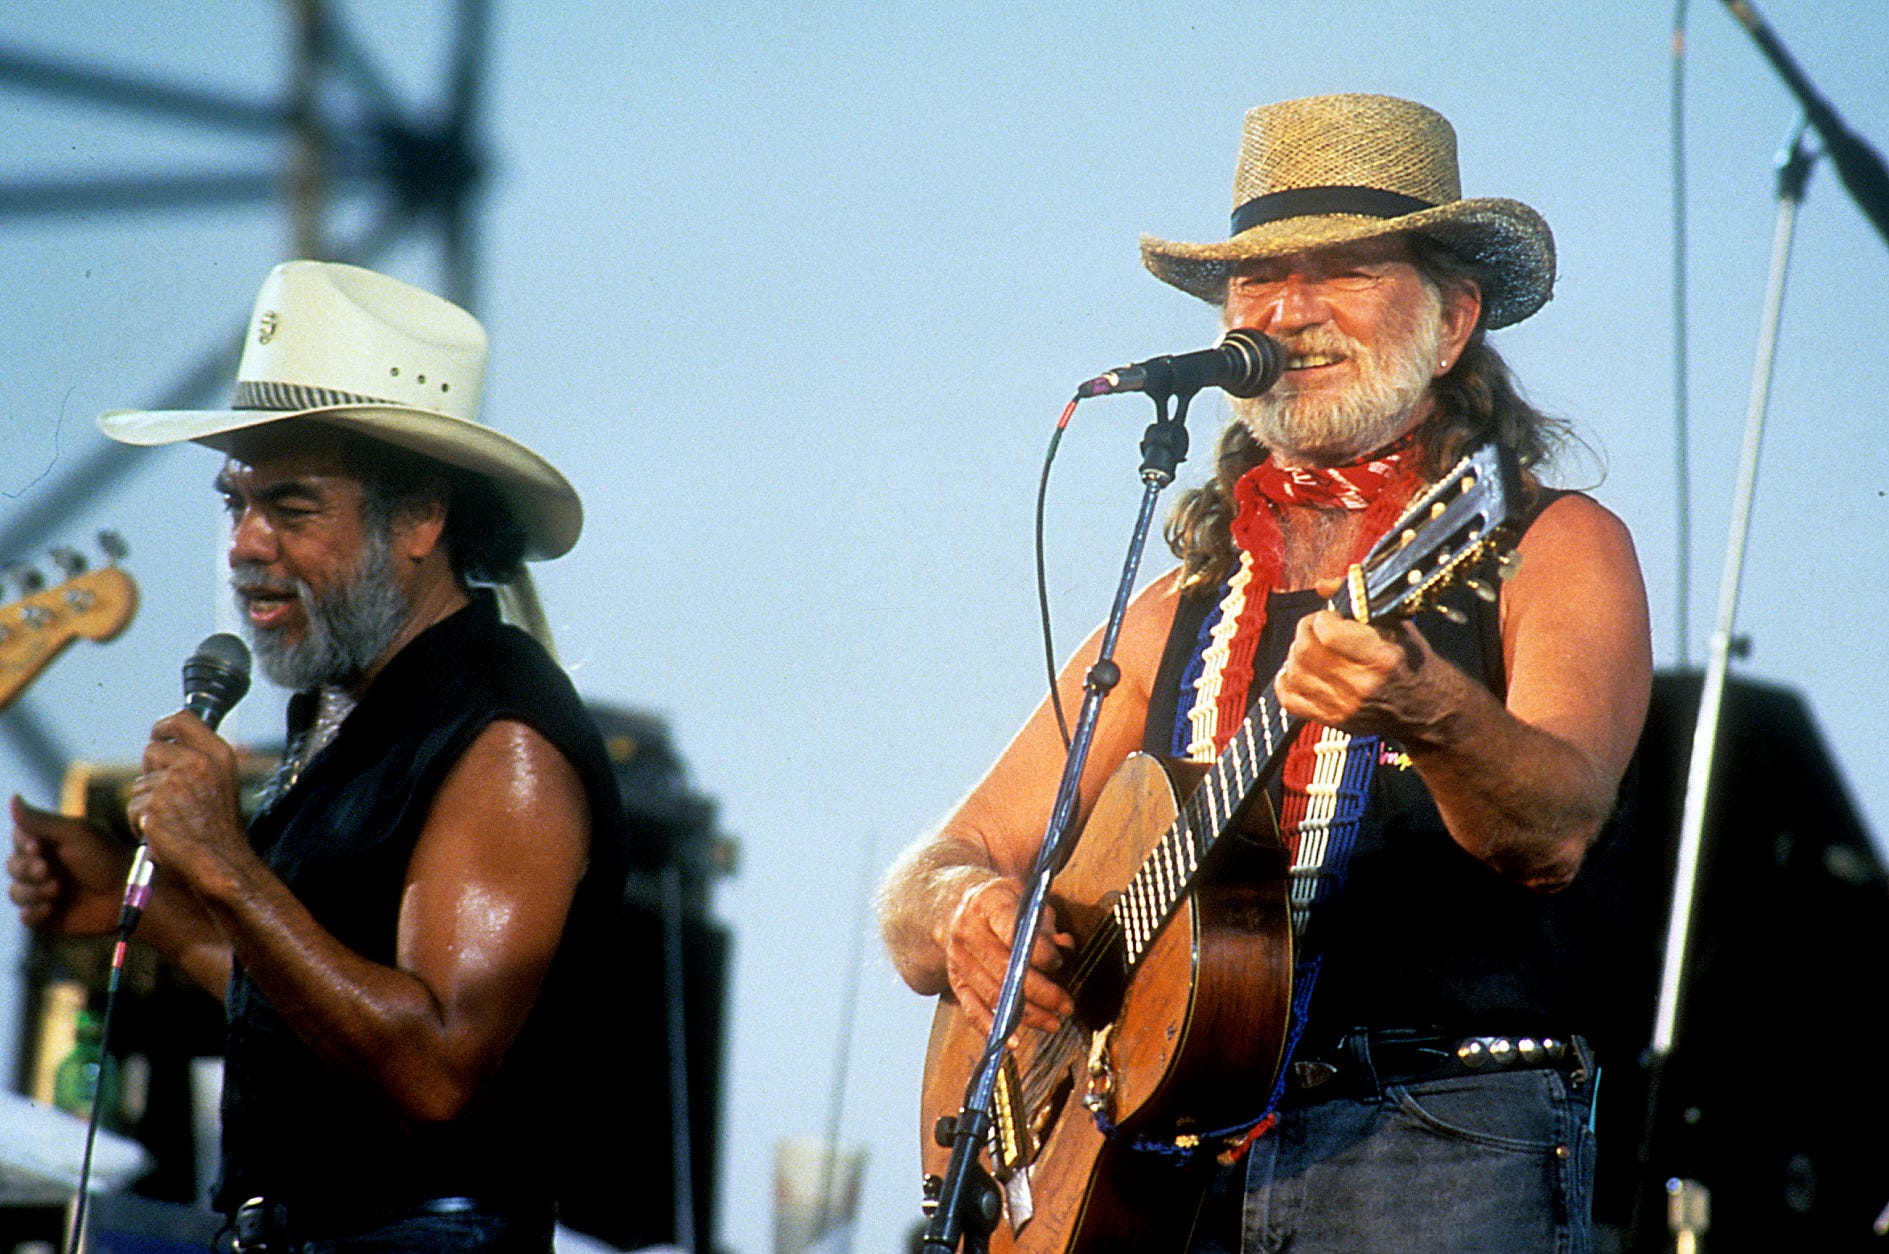 Willie Nelson performs with Little Joe Hernandez at the Willie Nelson's 4th of July picnic event on July 4, 1990.